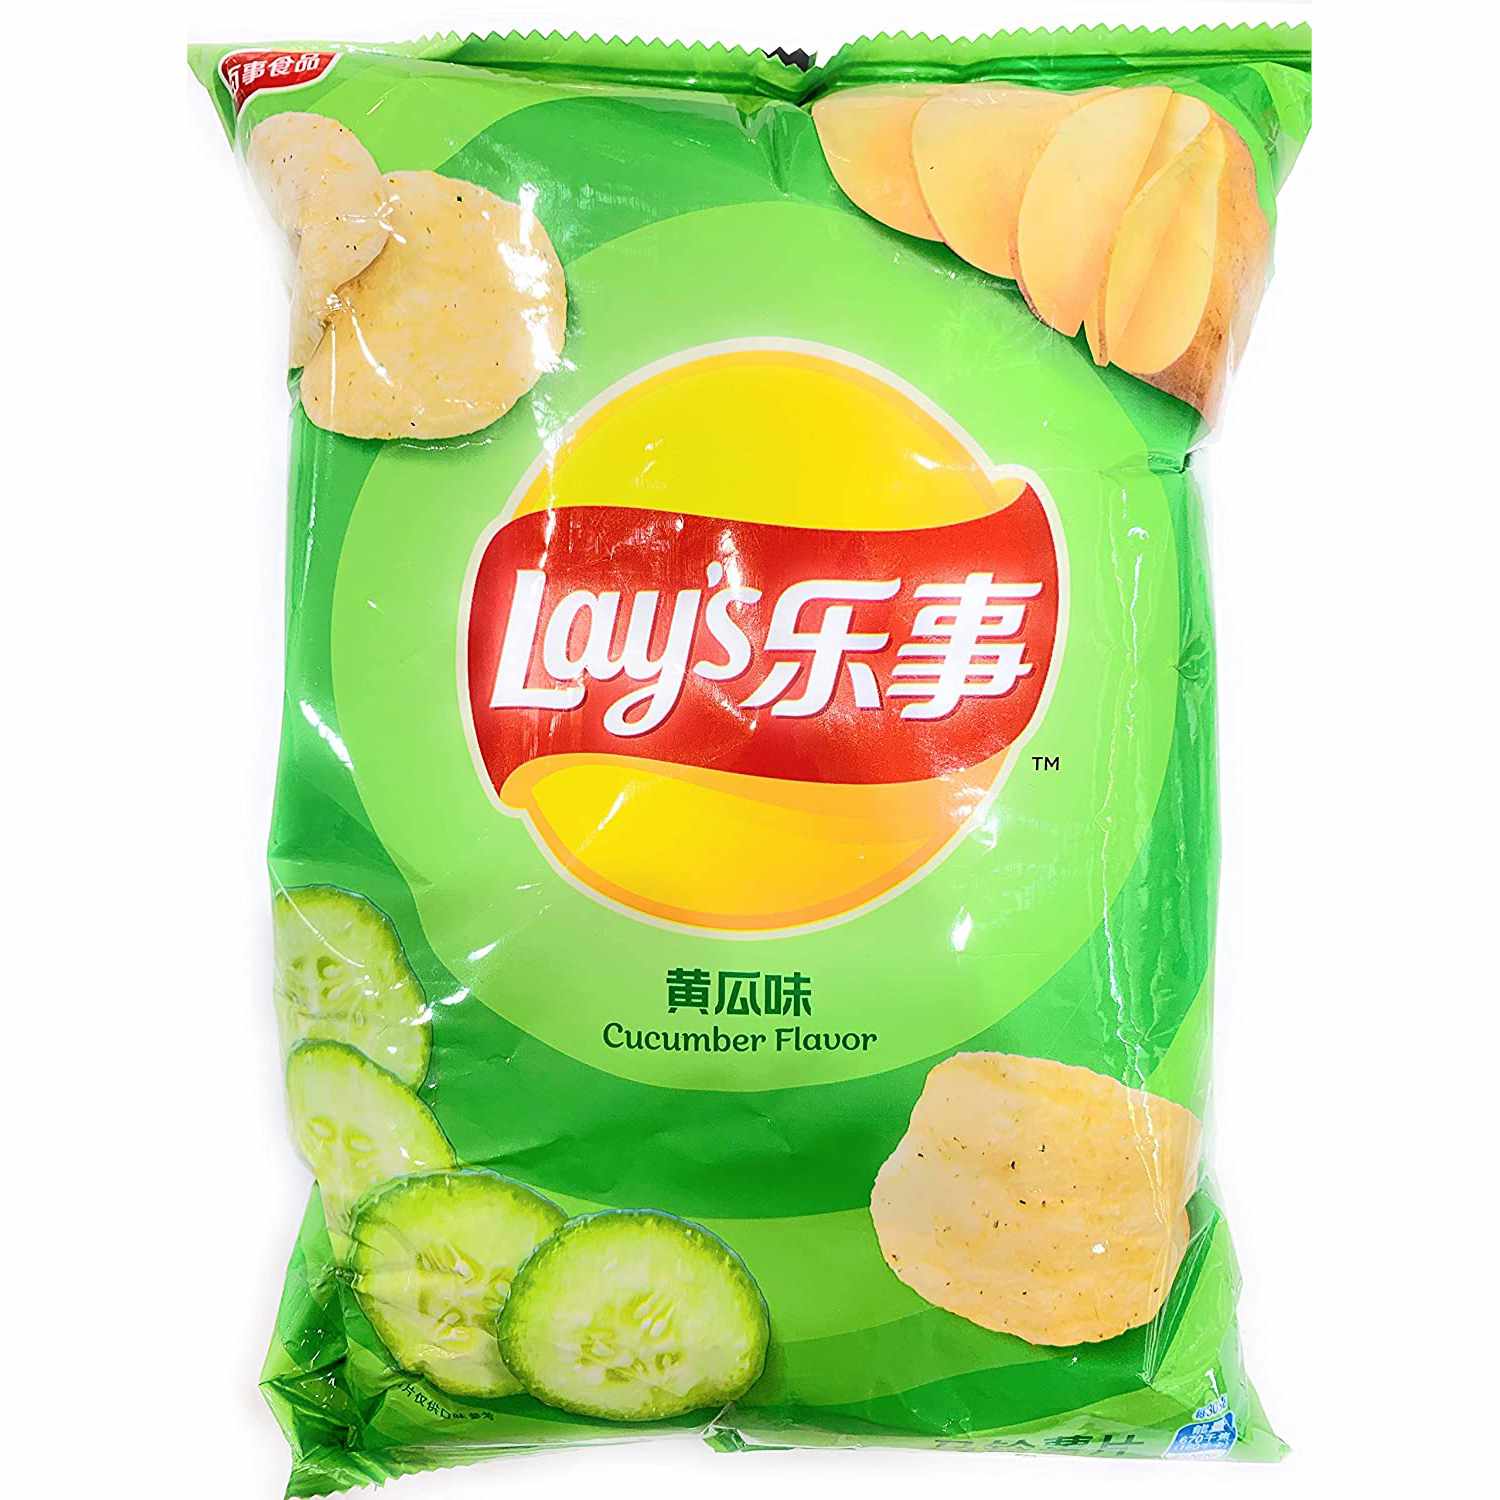 Lay's Cucumber chips on a white background